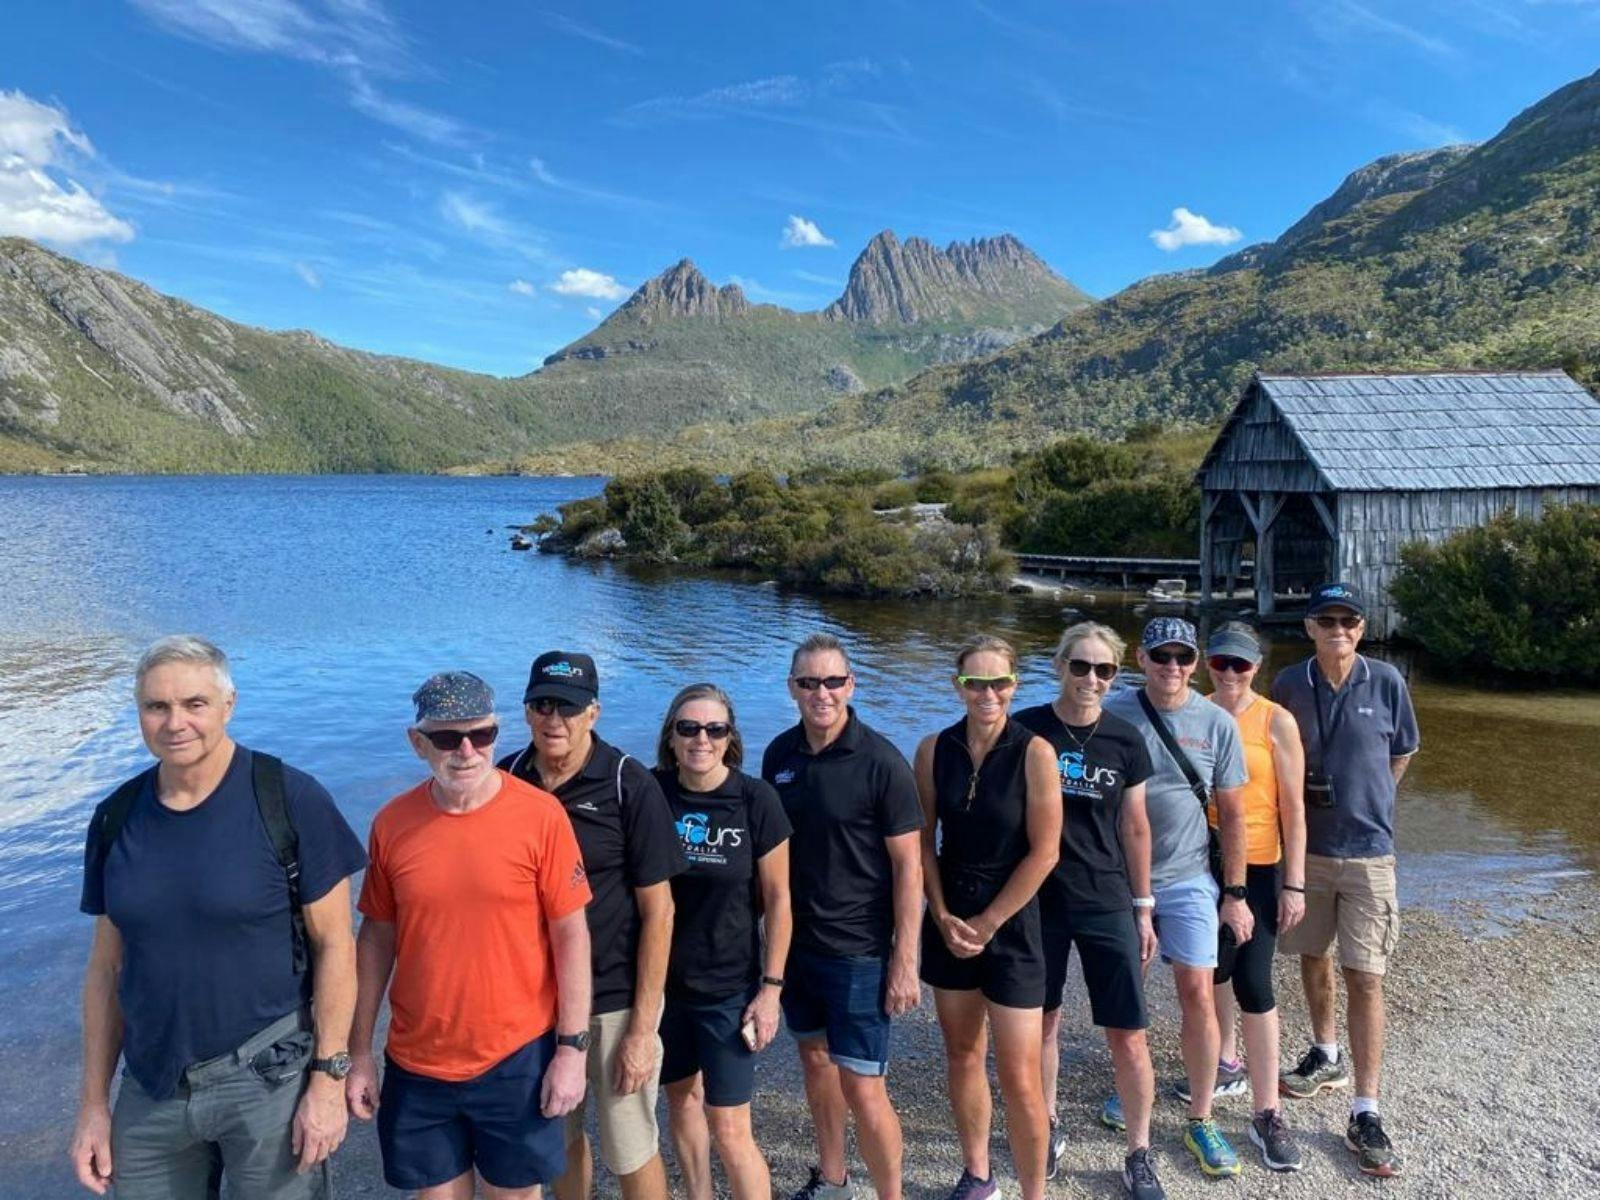 Group of people standing in a row at Dove Lake with old boat shed and Cradle Mountain in background.